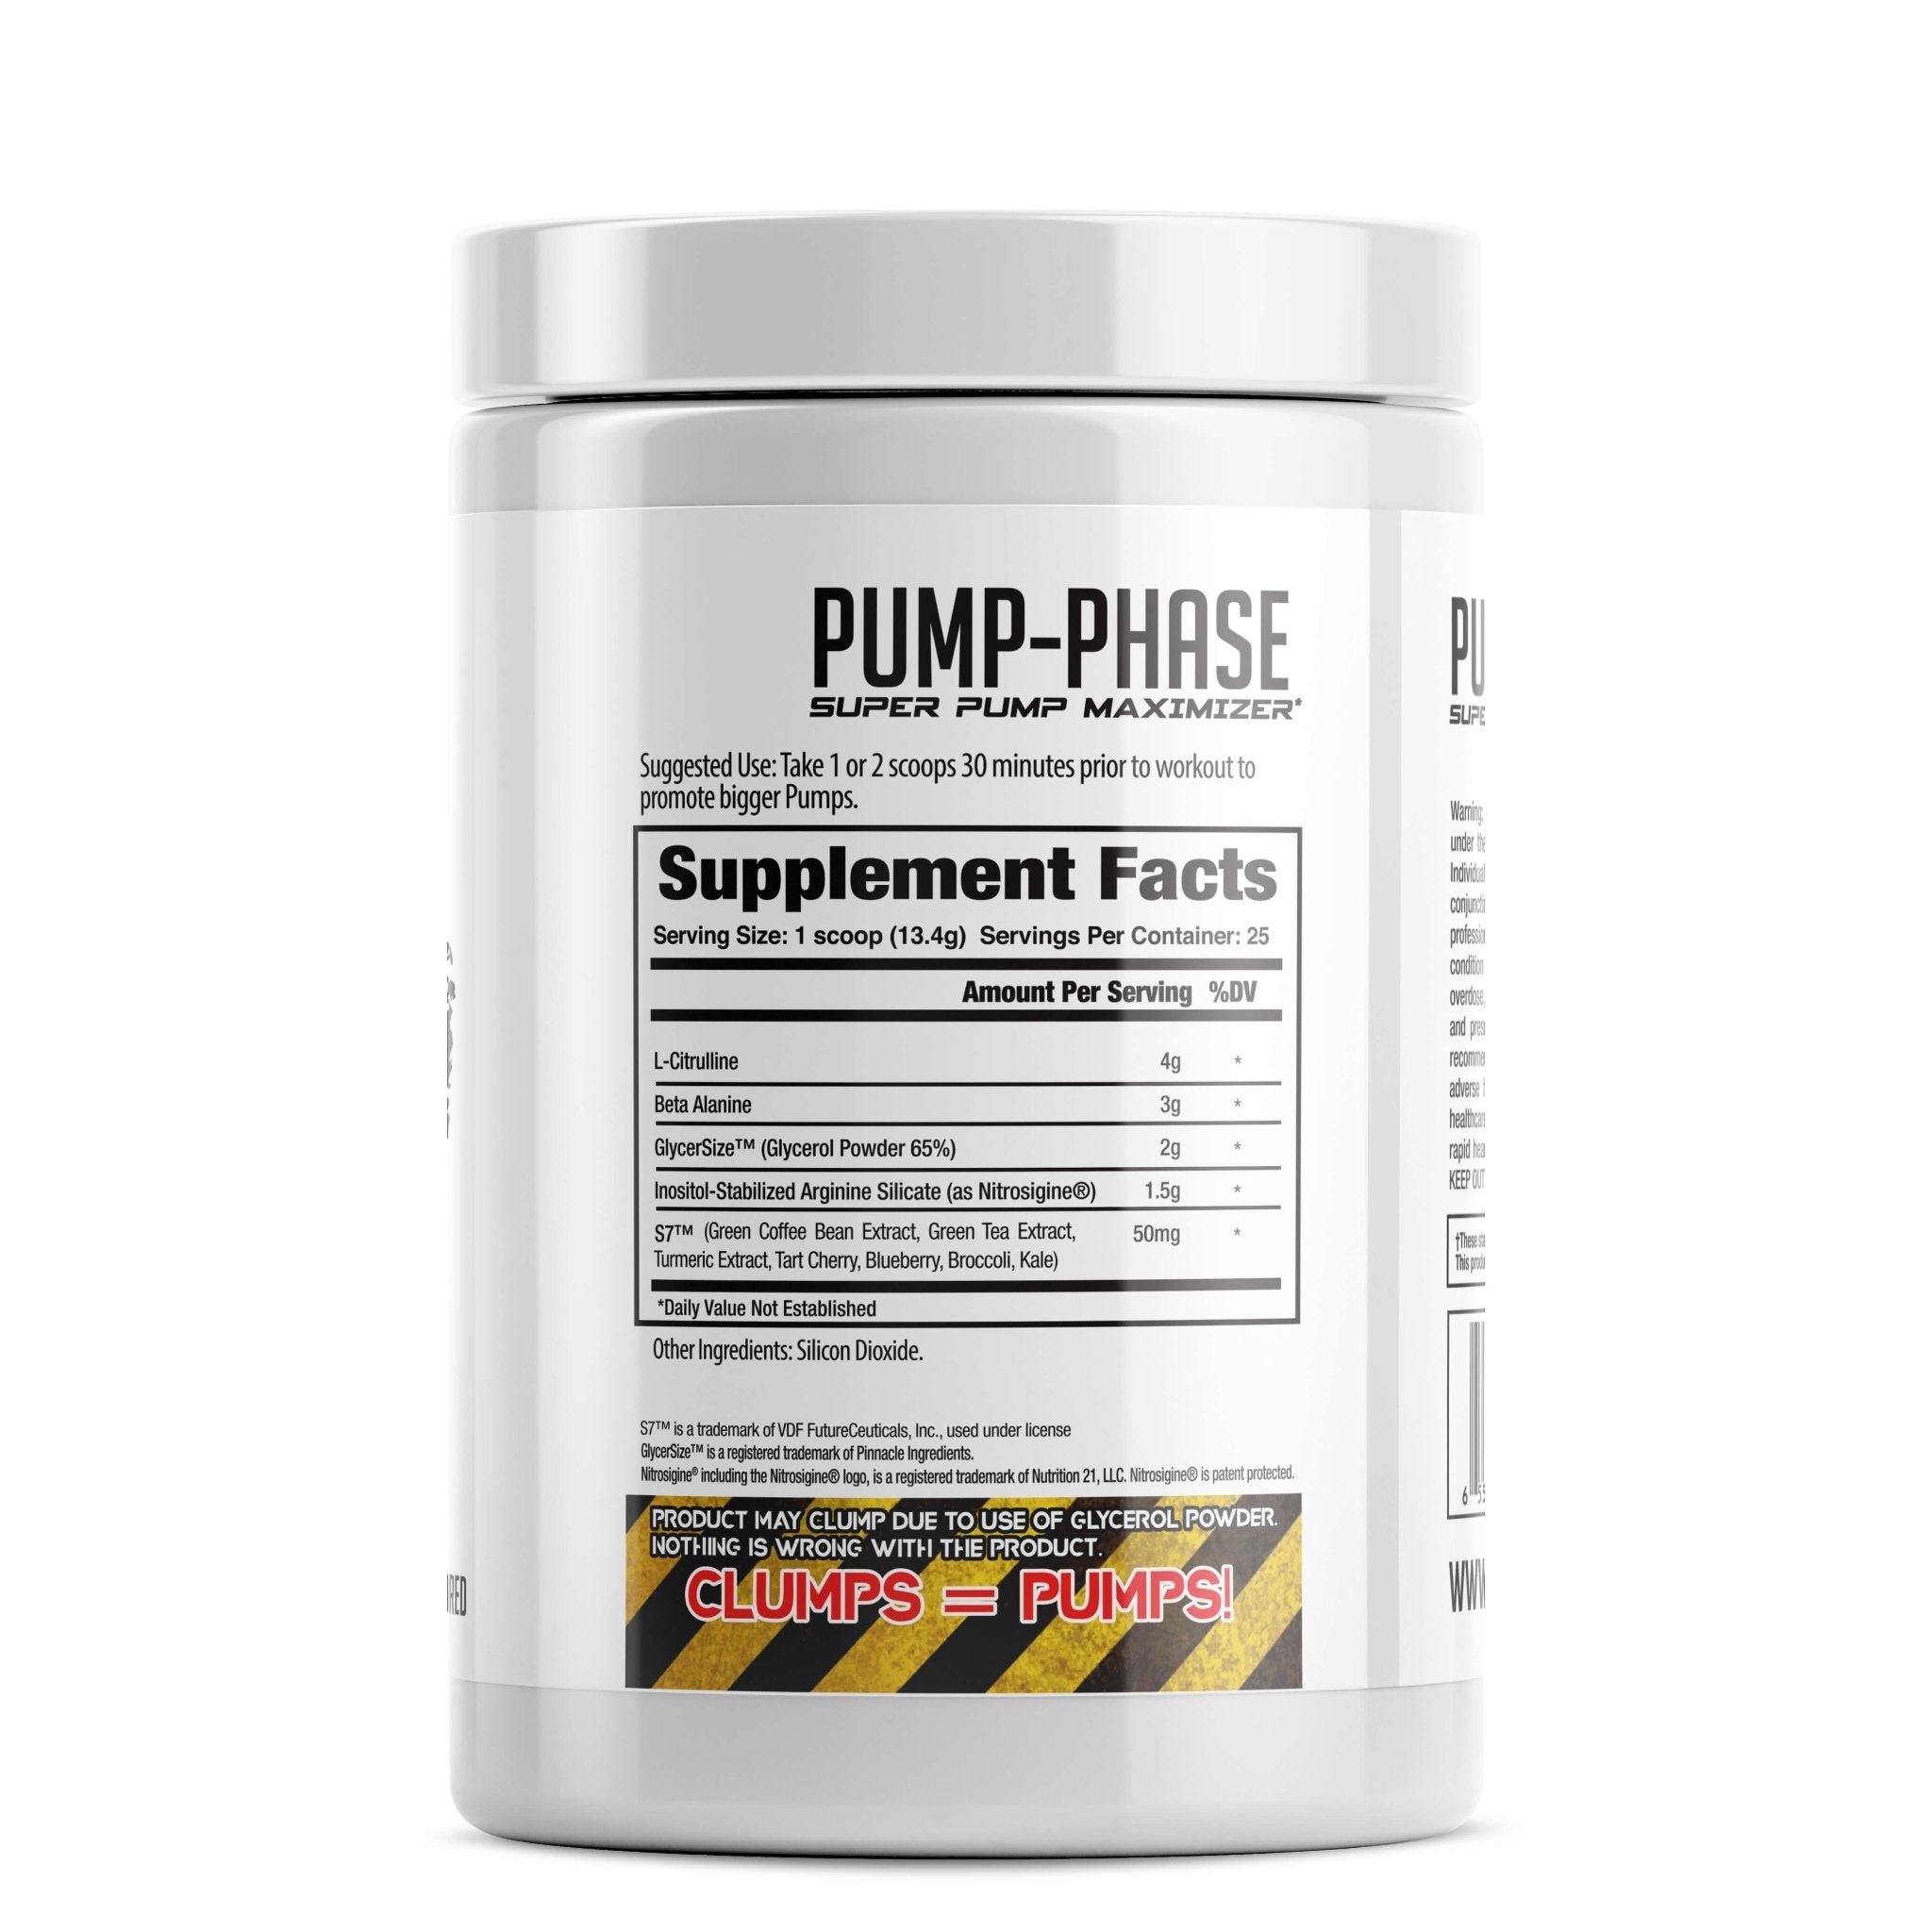 Phase One NutritionPUMP-PHASEStimulant Free Pre-WorkoutRED SUPPS